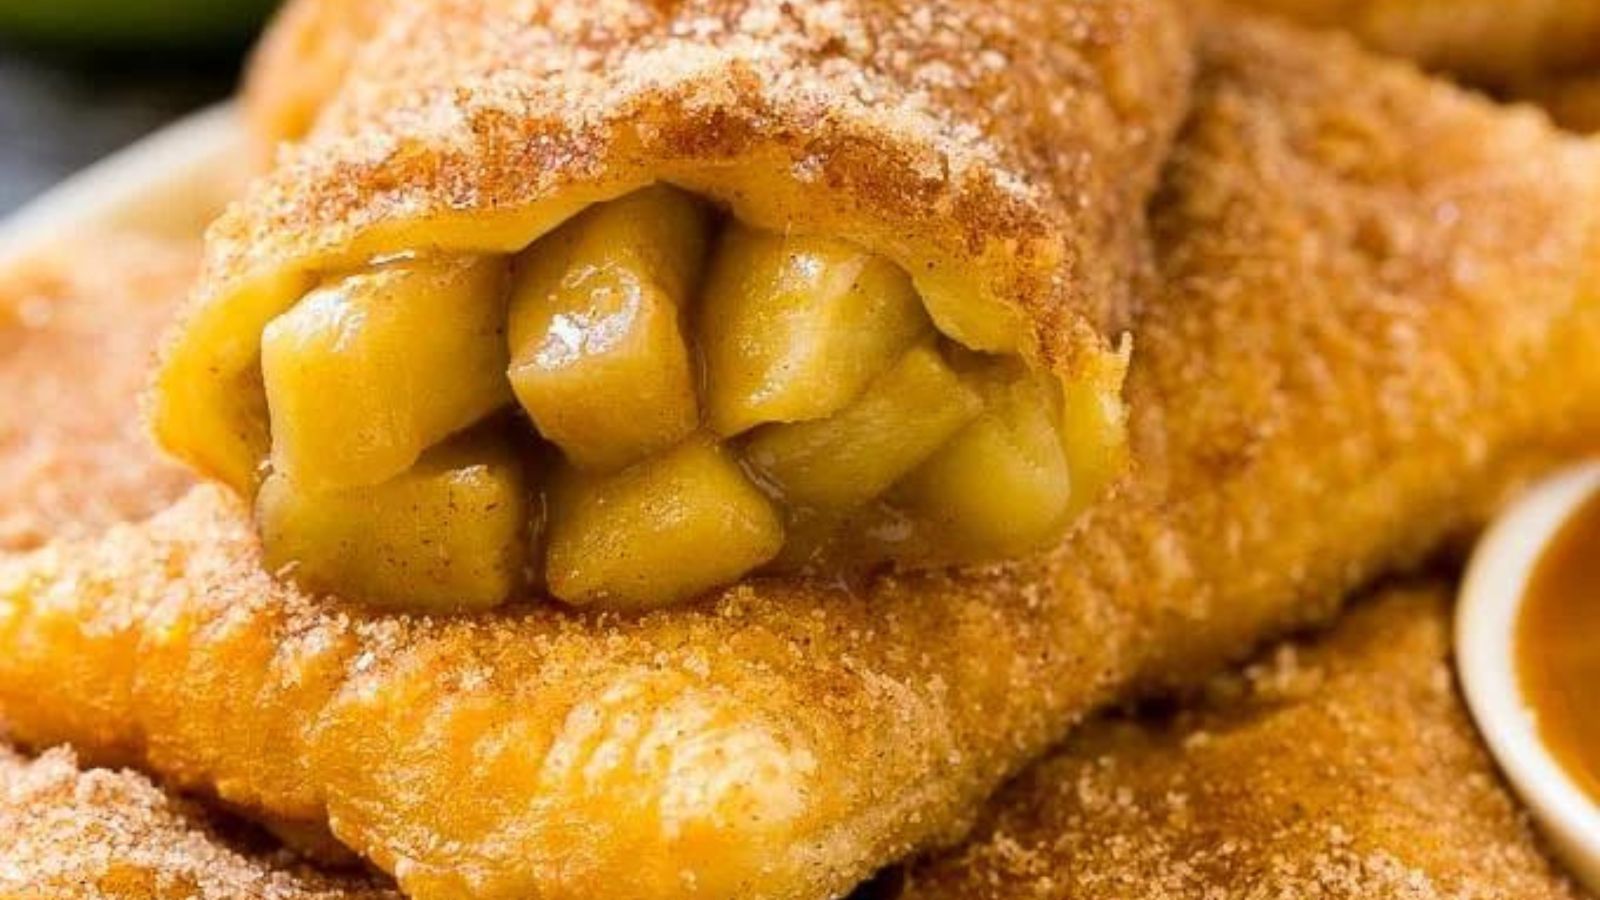 Discover 16 Winter-Warmer Apple Desserts to Sweeten Your Chilly Days